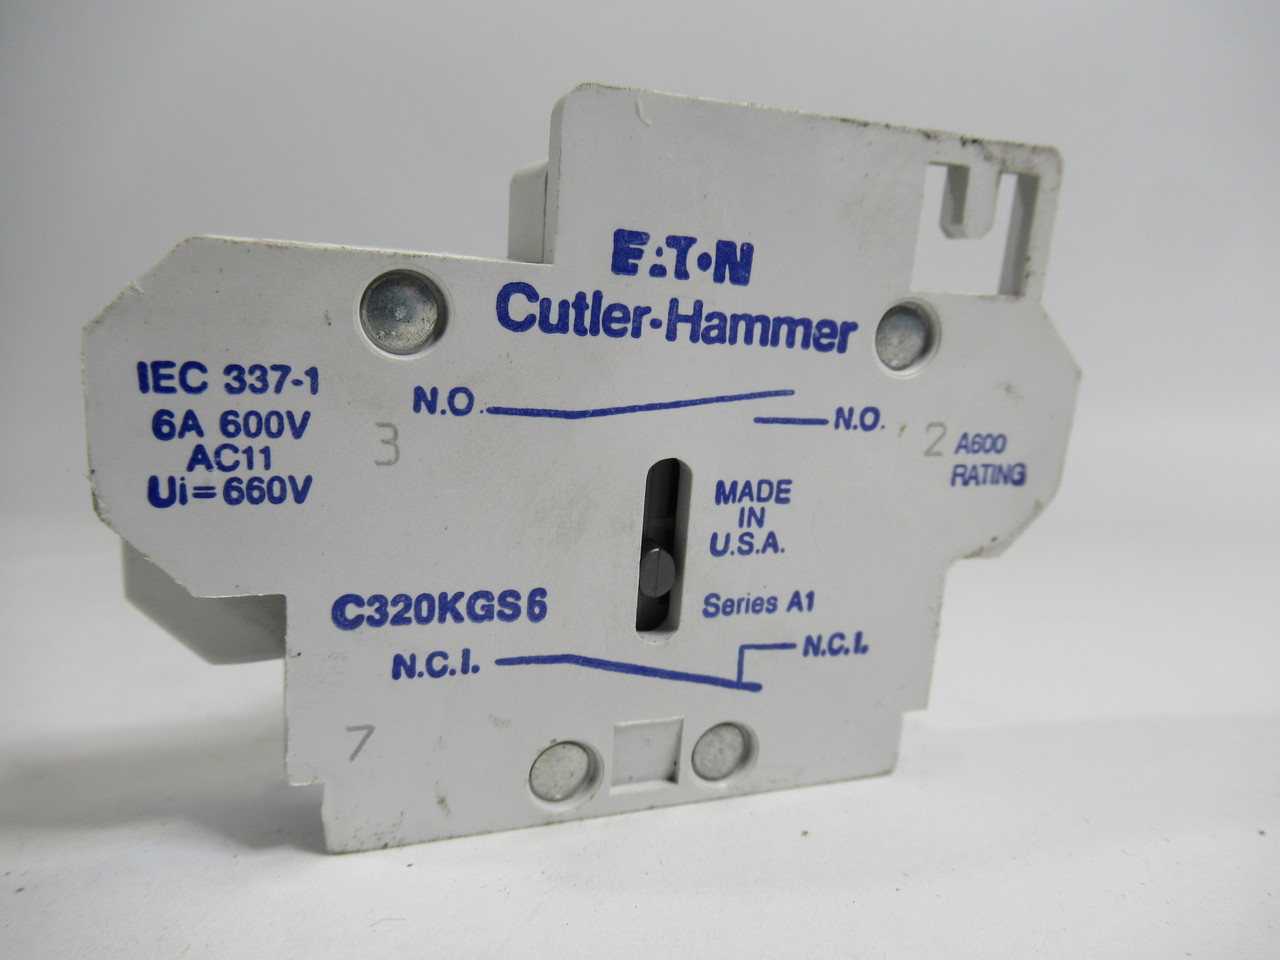 Eaton Cutler Hammer C320KGS6 Ser. A1 Auxiliary Contact Block 6A 600V USED